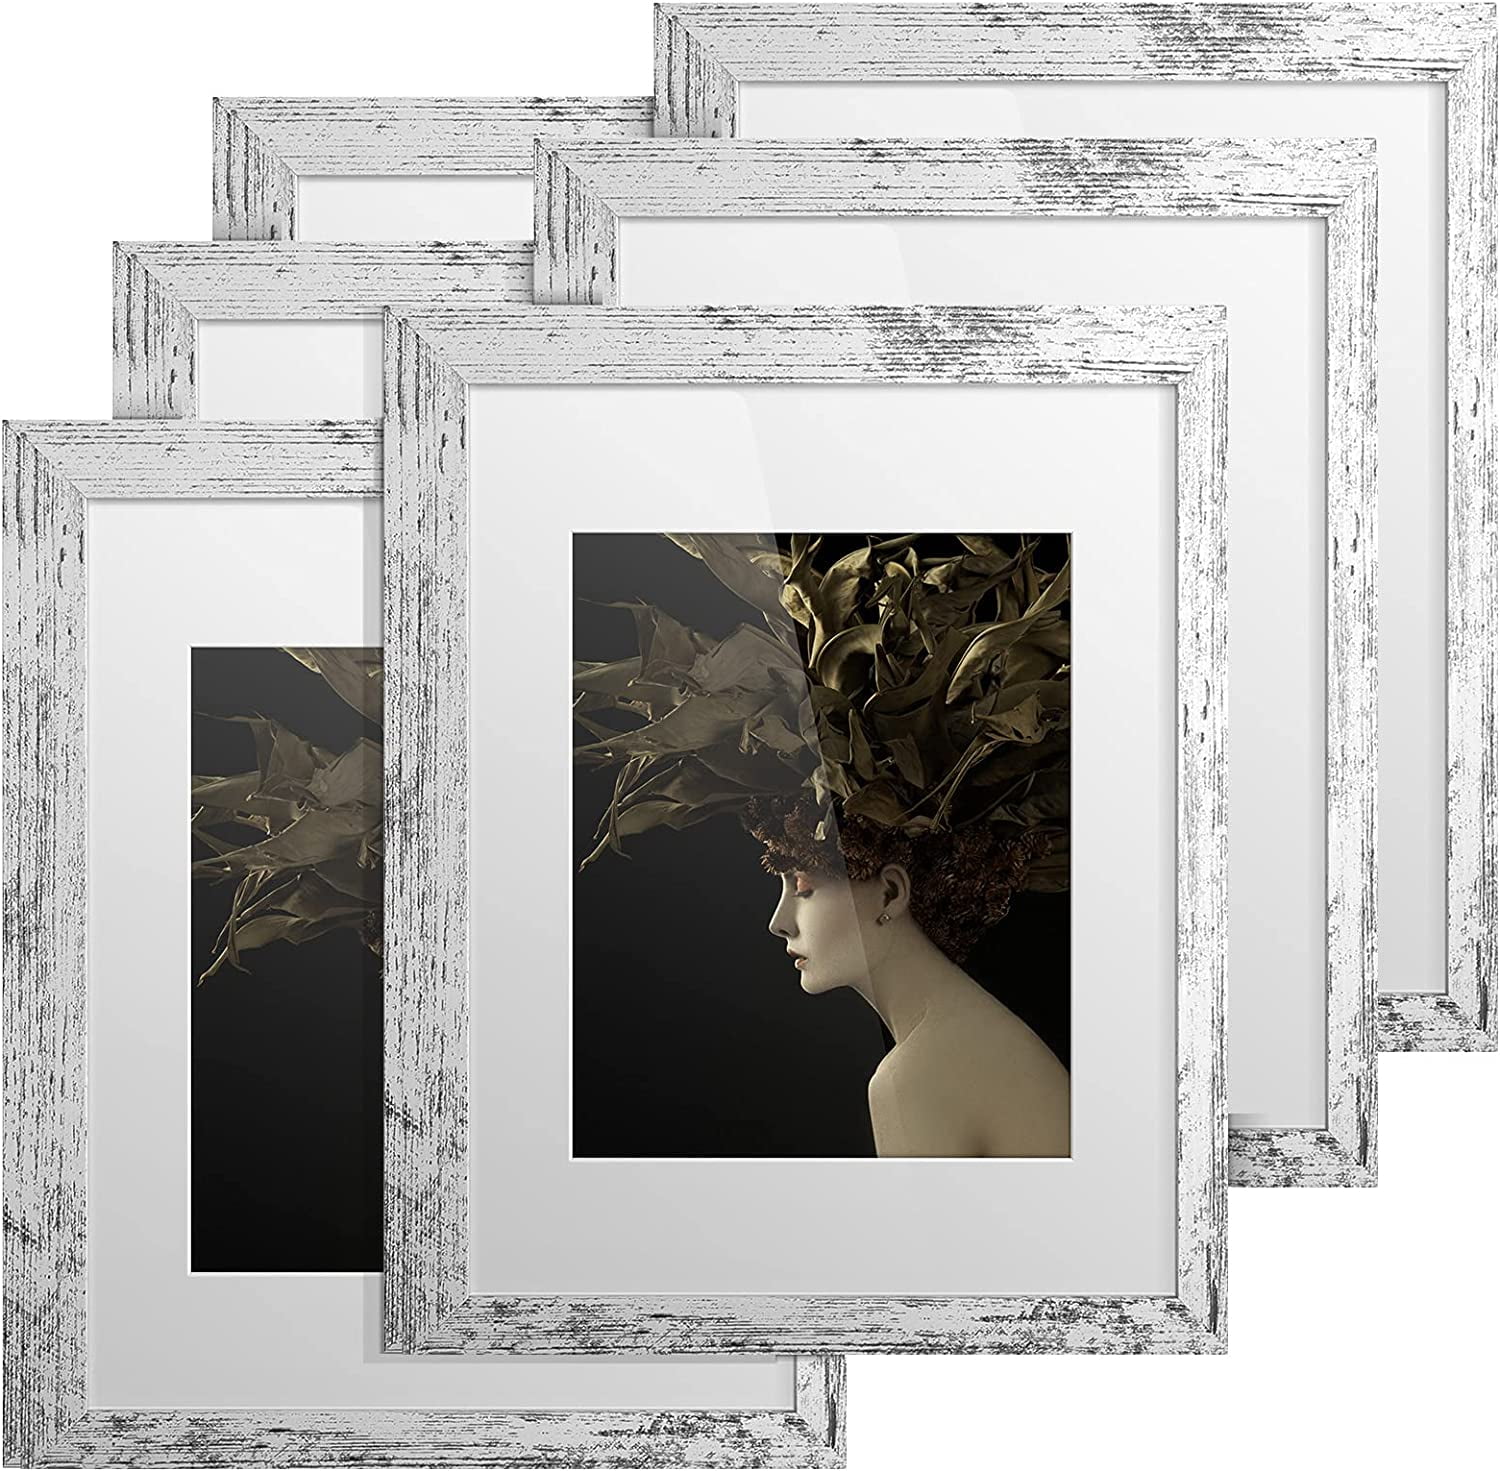 Metronic 12x16 Picture Frames Set Of 6 Distressed White Farmhouse Rustic Photo Frames Large Wall Frame Set 21e55e82 5c35 473d A8dd Fb4dad5a3bc9.406088d1ca5382a0c90f21230b41a9b5 